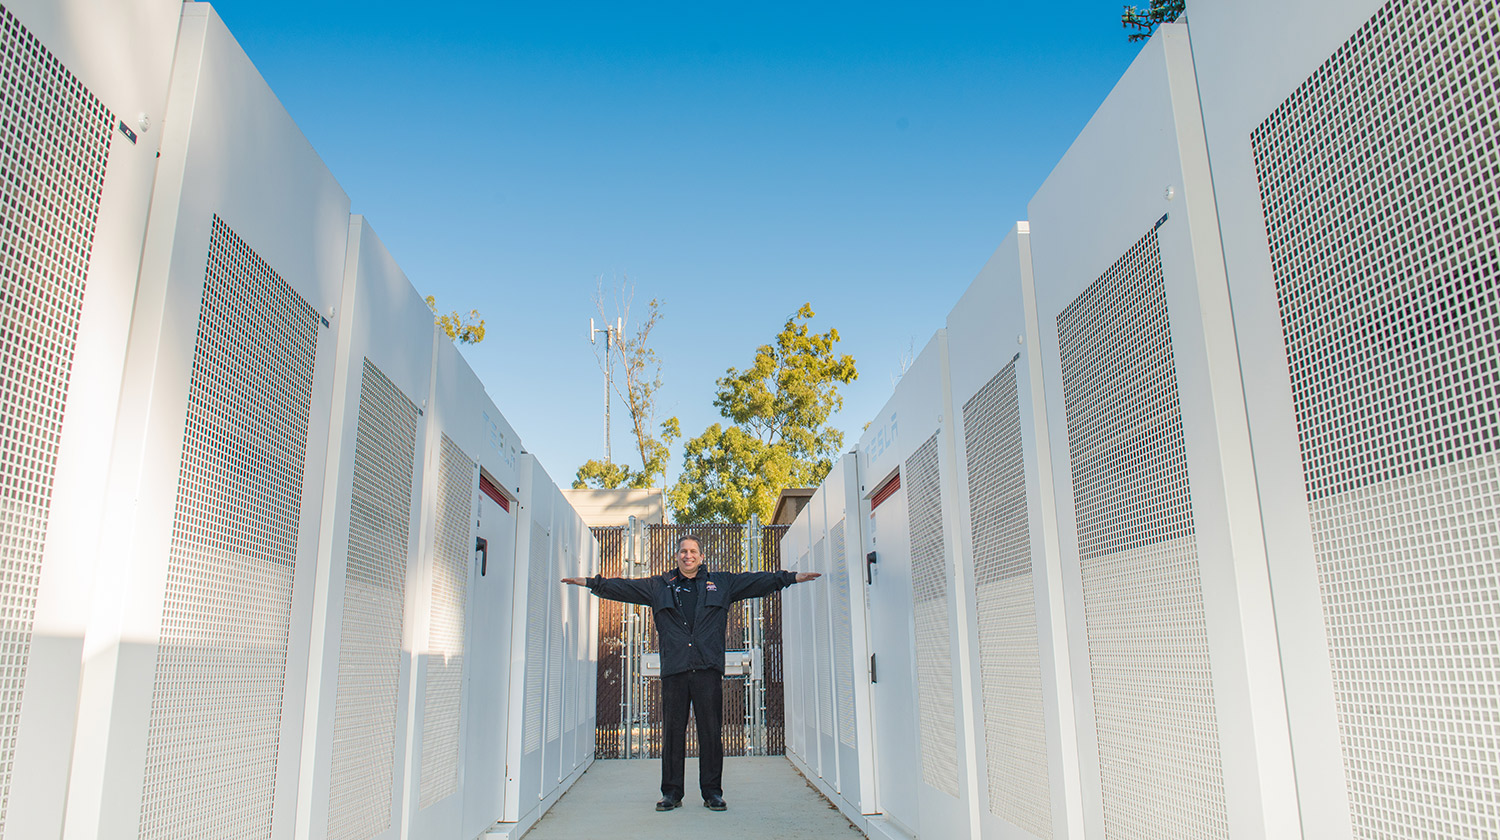 Kenny Seeton, Central Plant/energy manager at CSUDH, stands among 20 Tesla battery banks installed on campus to help reduce the university's impact on the local power grid.